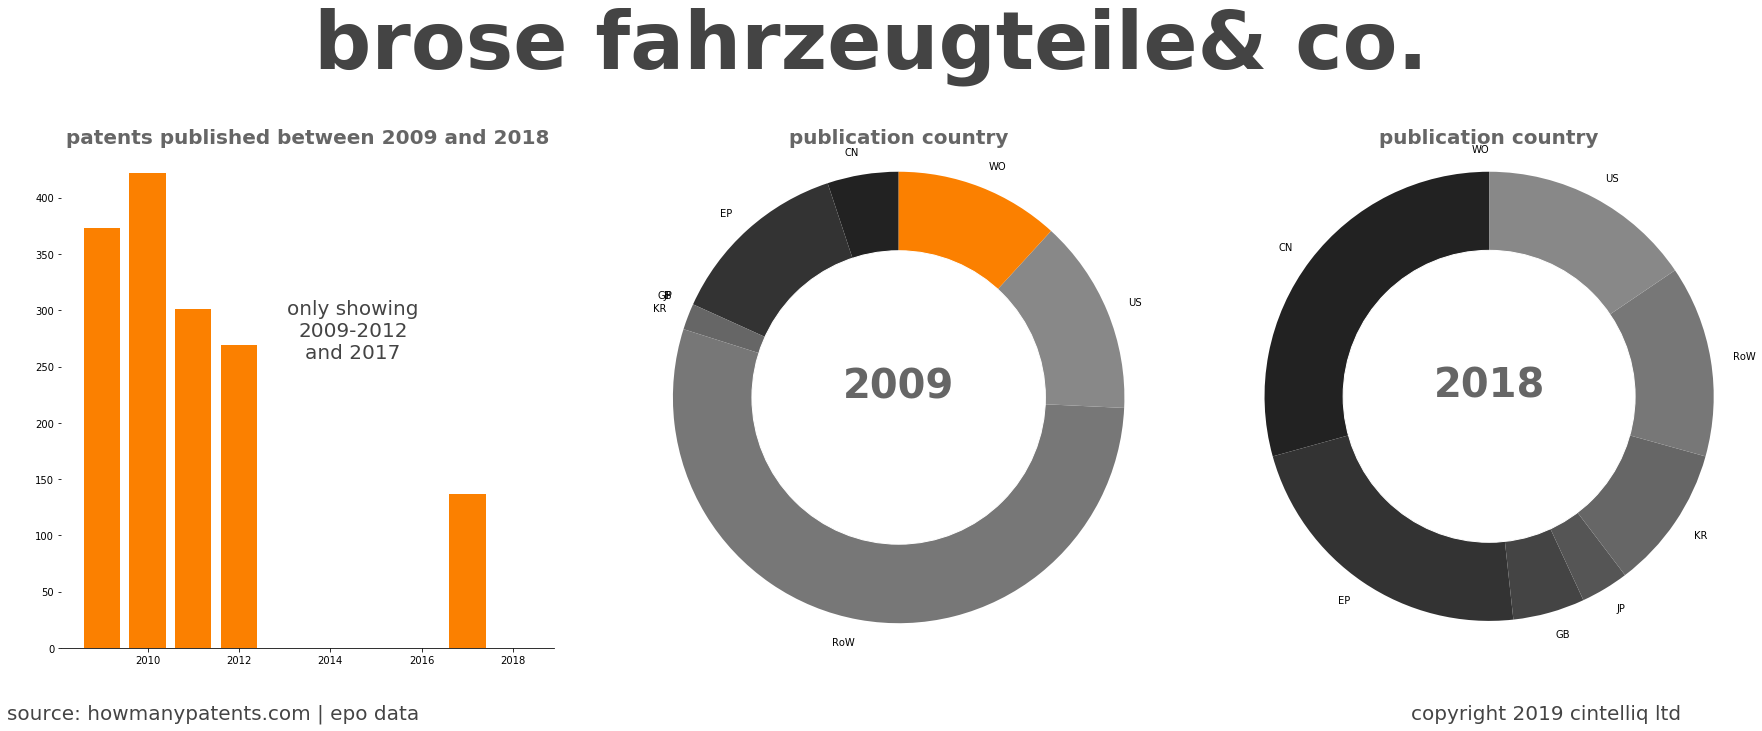 summary of patents for Brose Fahrzeugteile& Co.